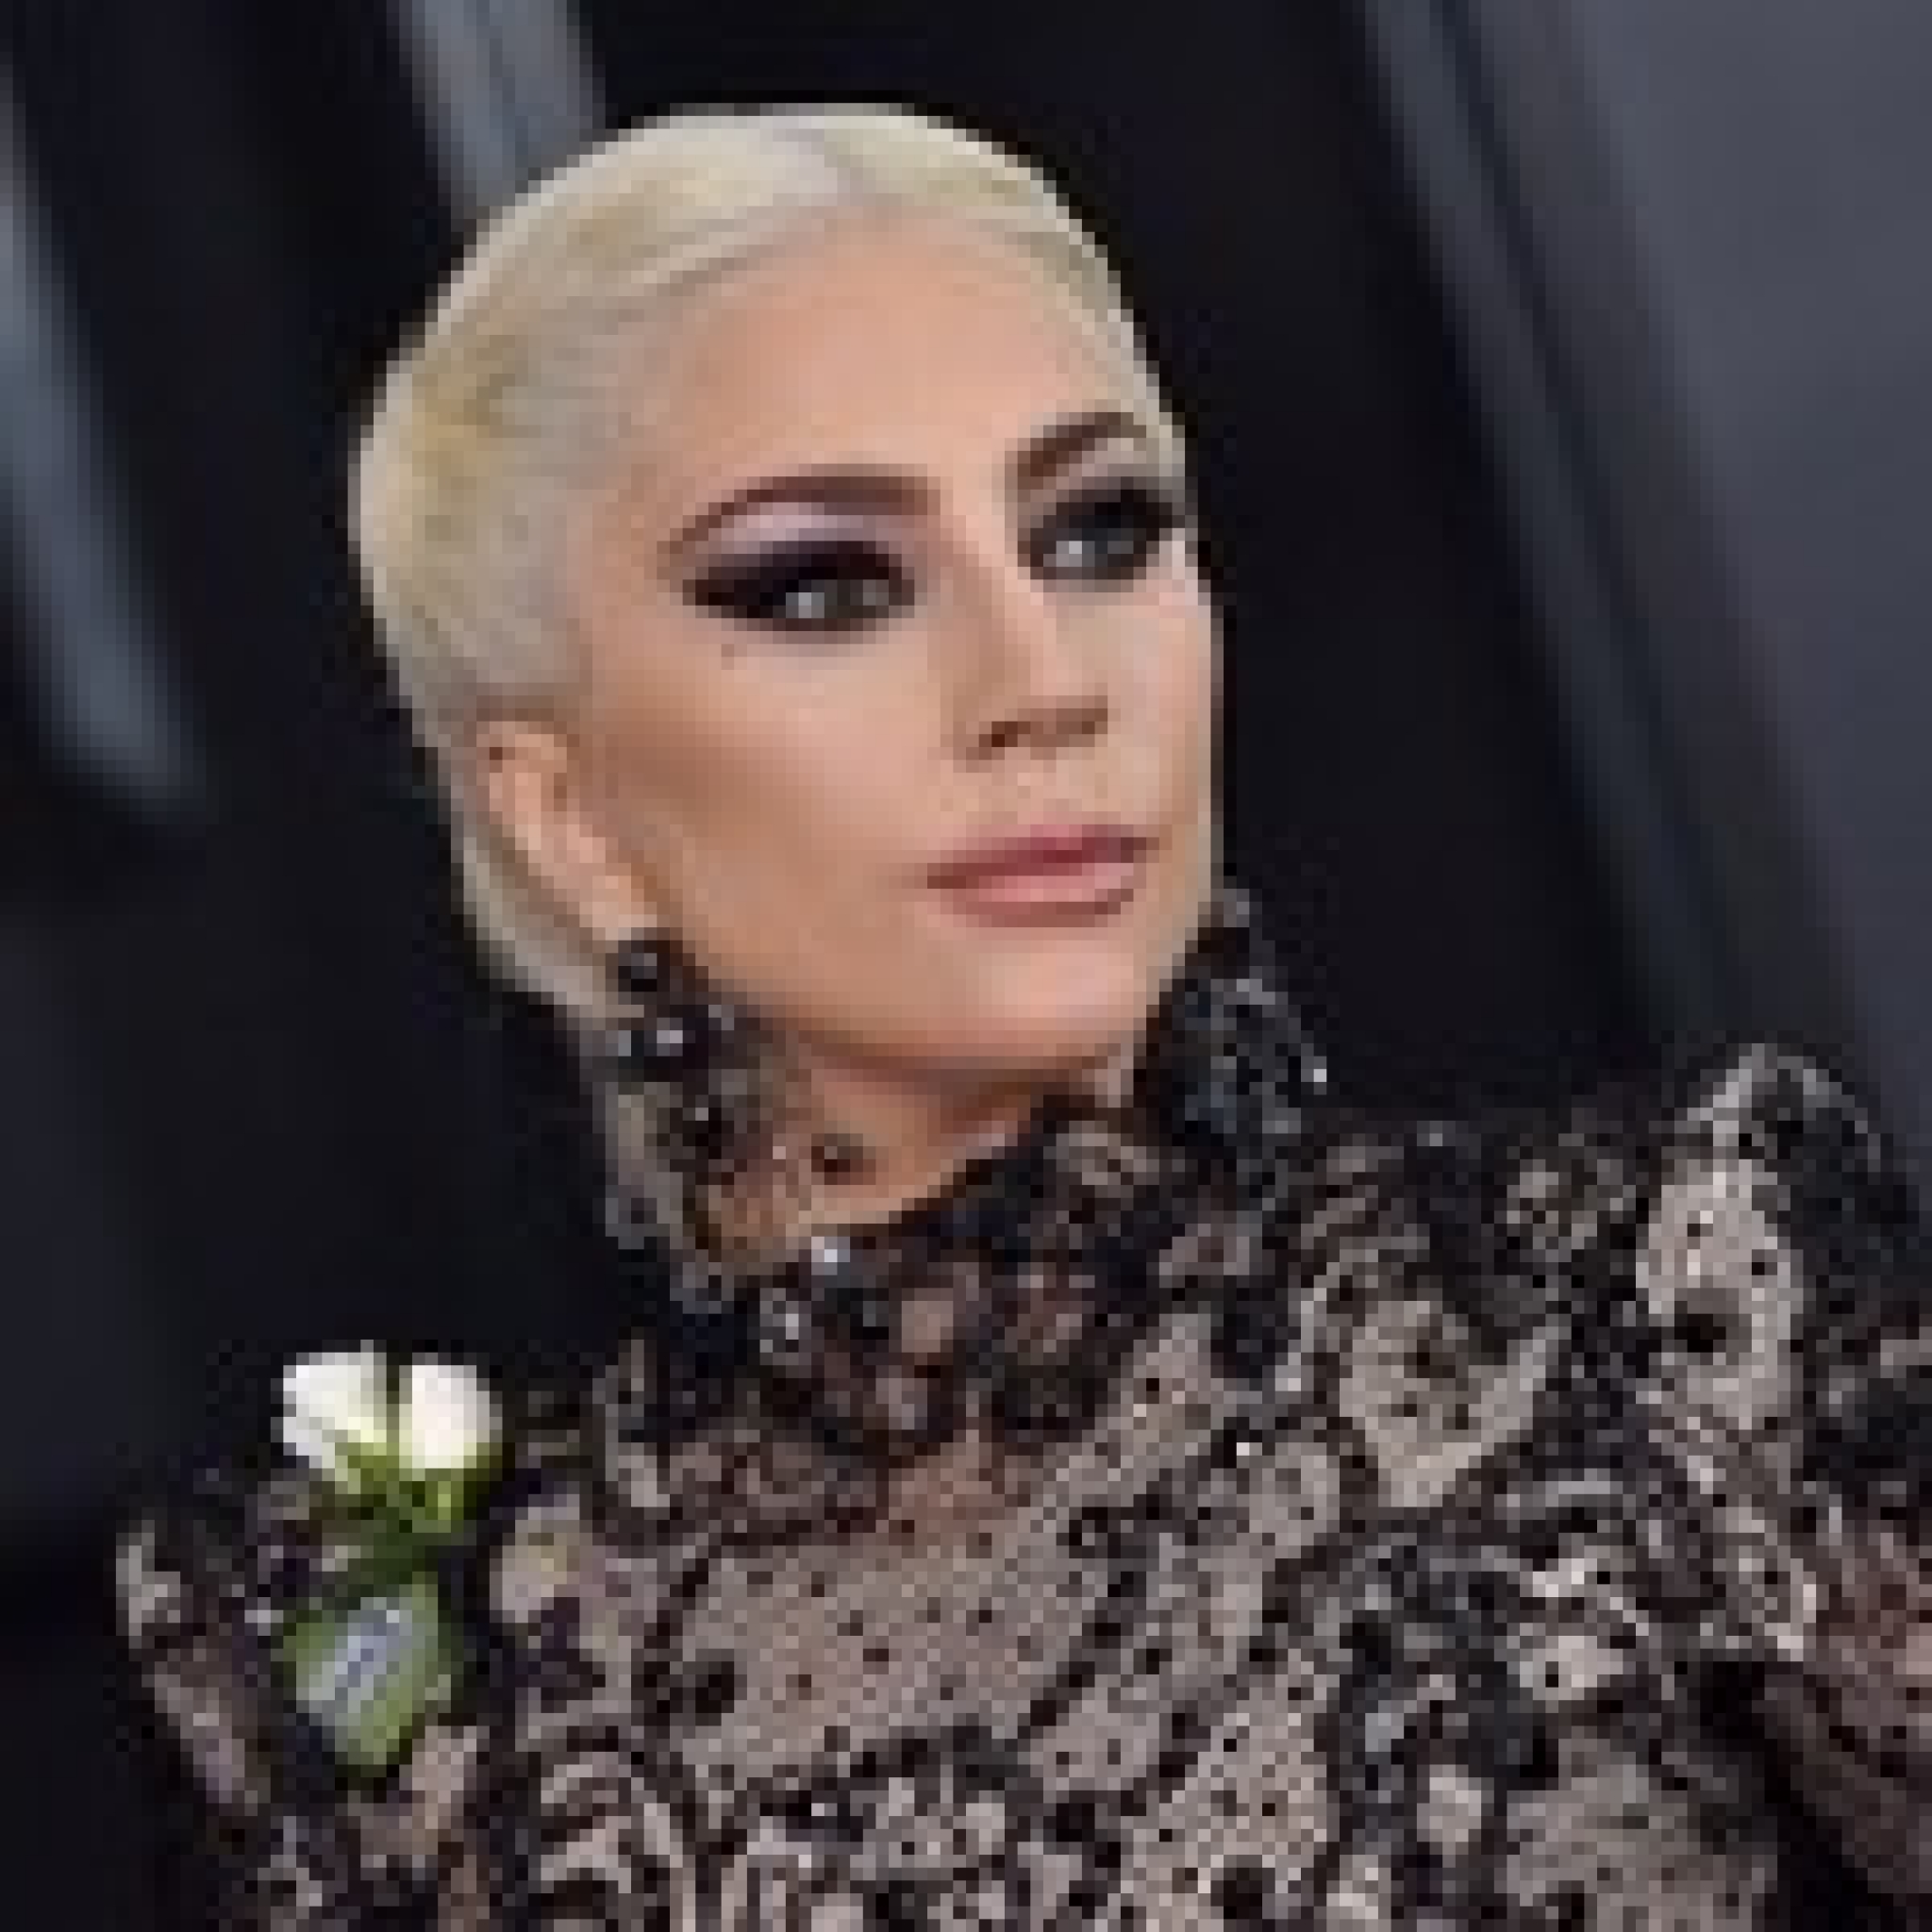 5 Arrests Made in Lady Gaga Dogwalker’s Shooting & Dog Abduction